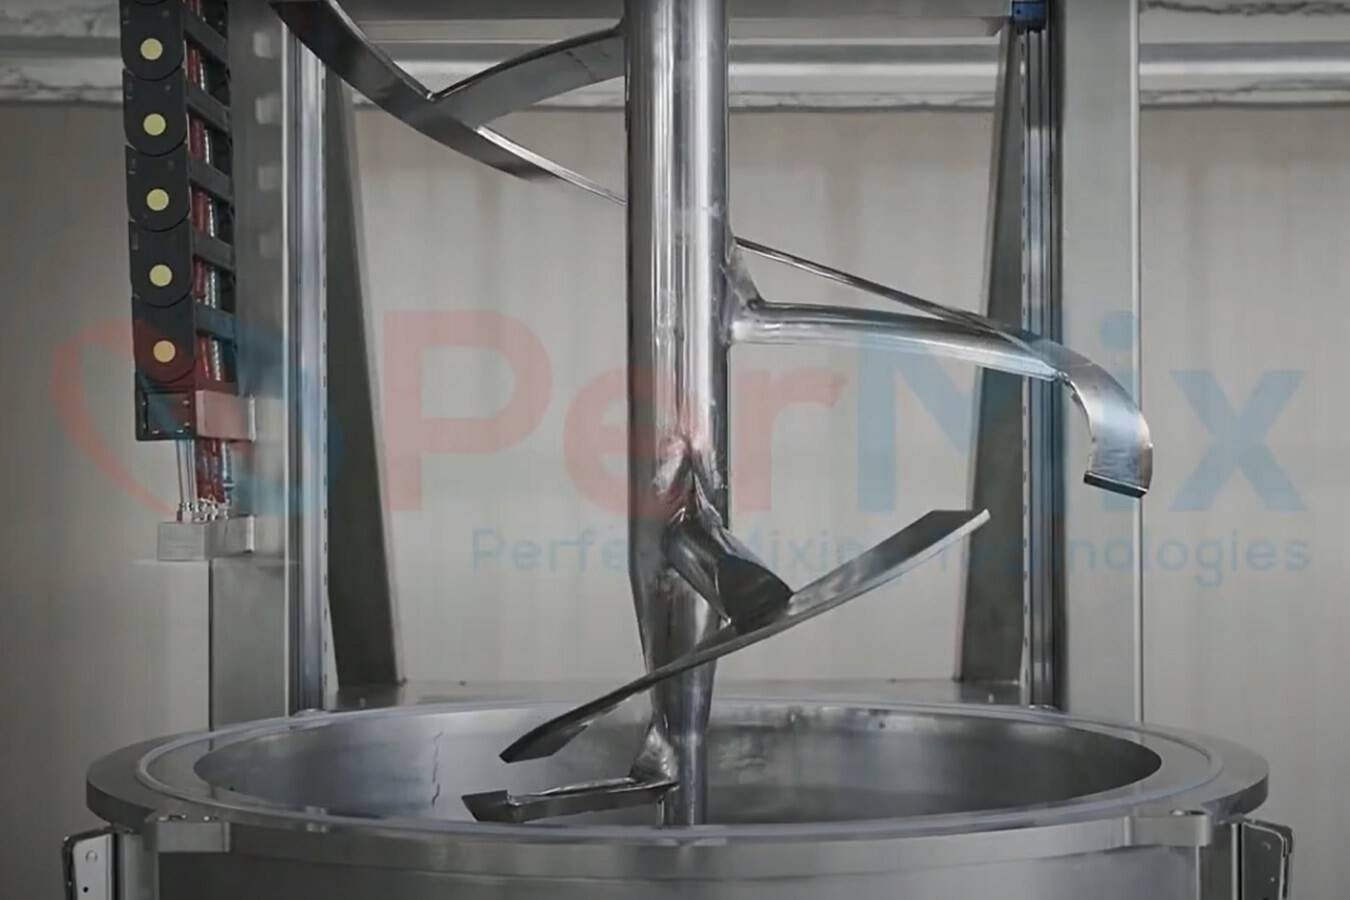 Permix EZ-Clean series mixers: Mixer Cleaning Made Easy